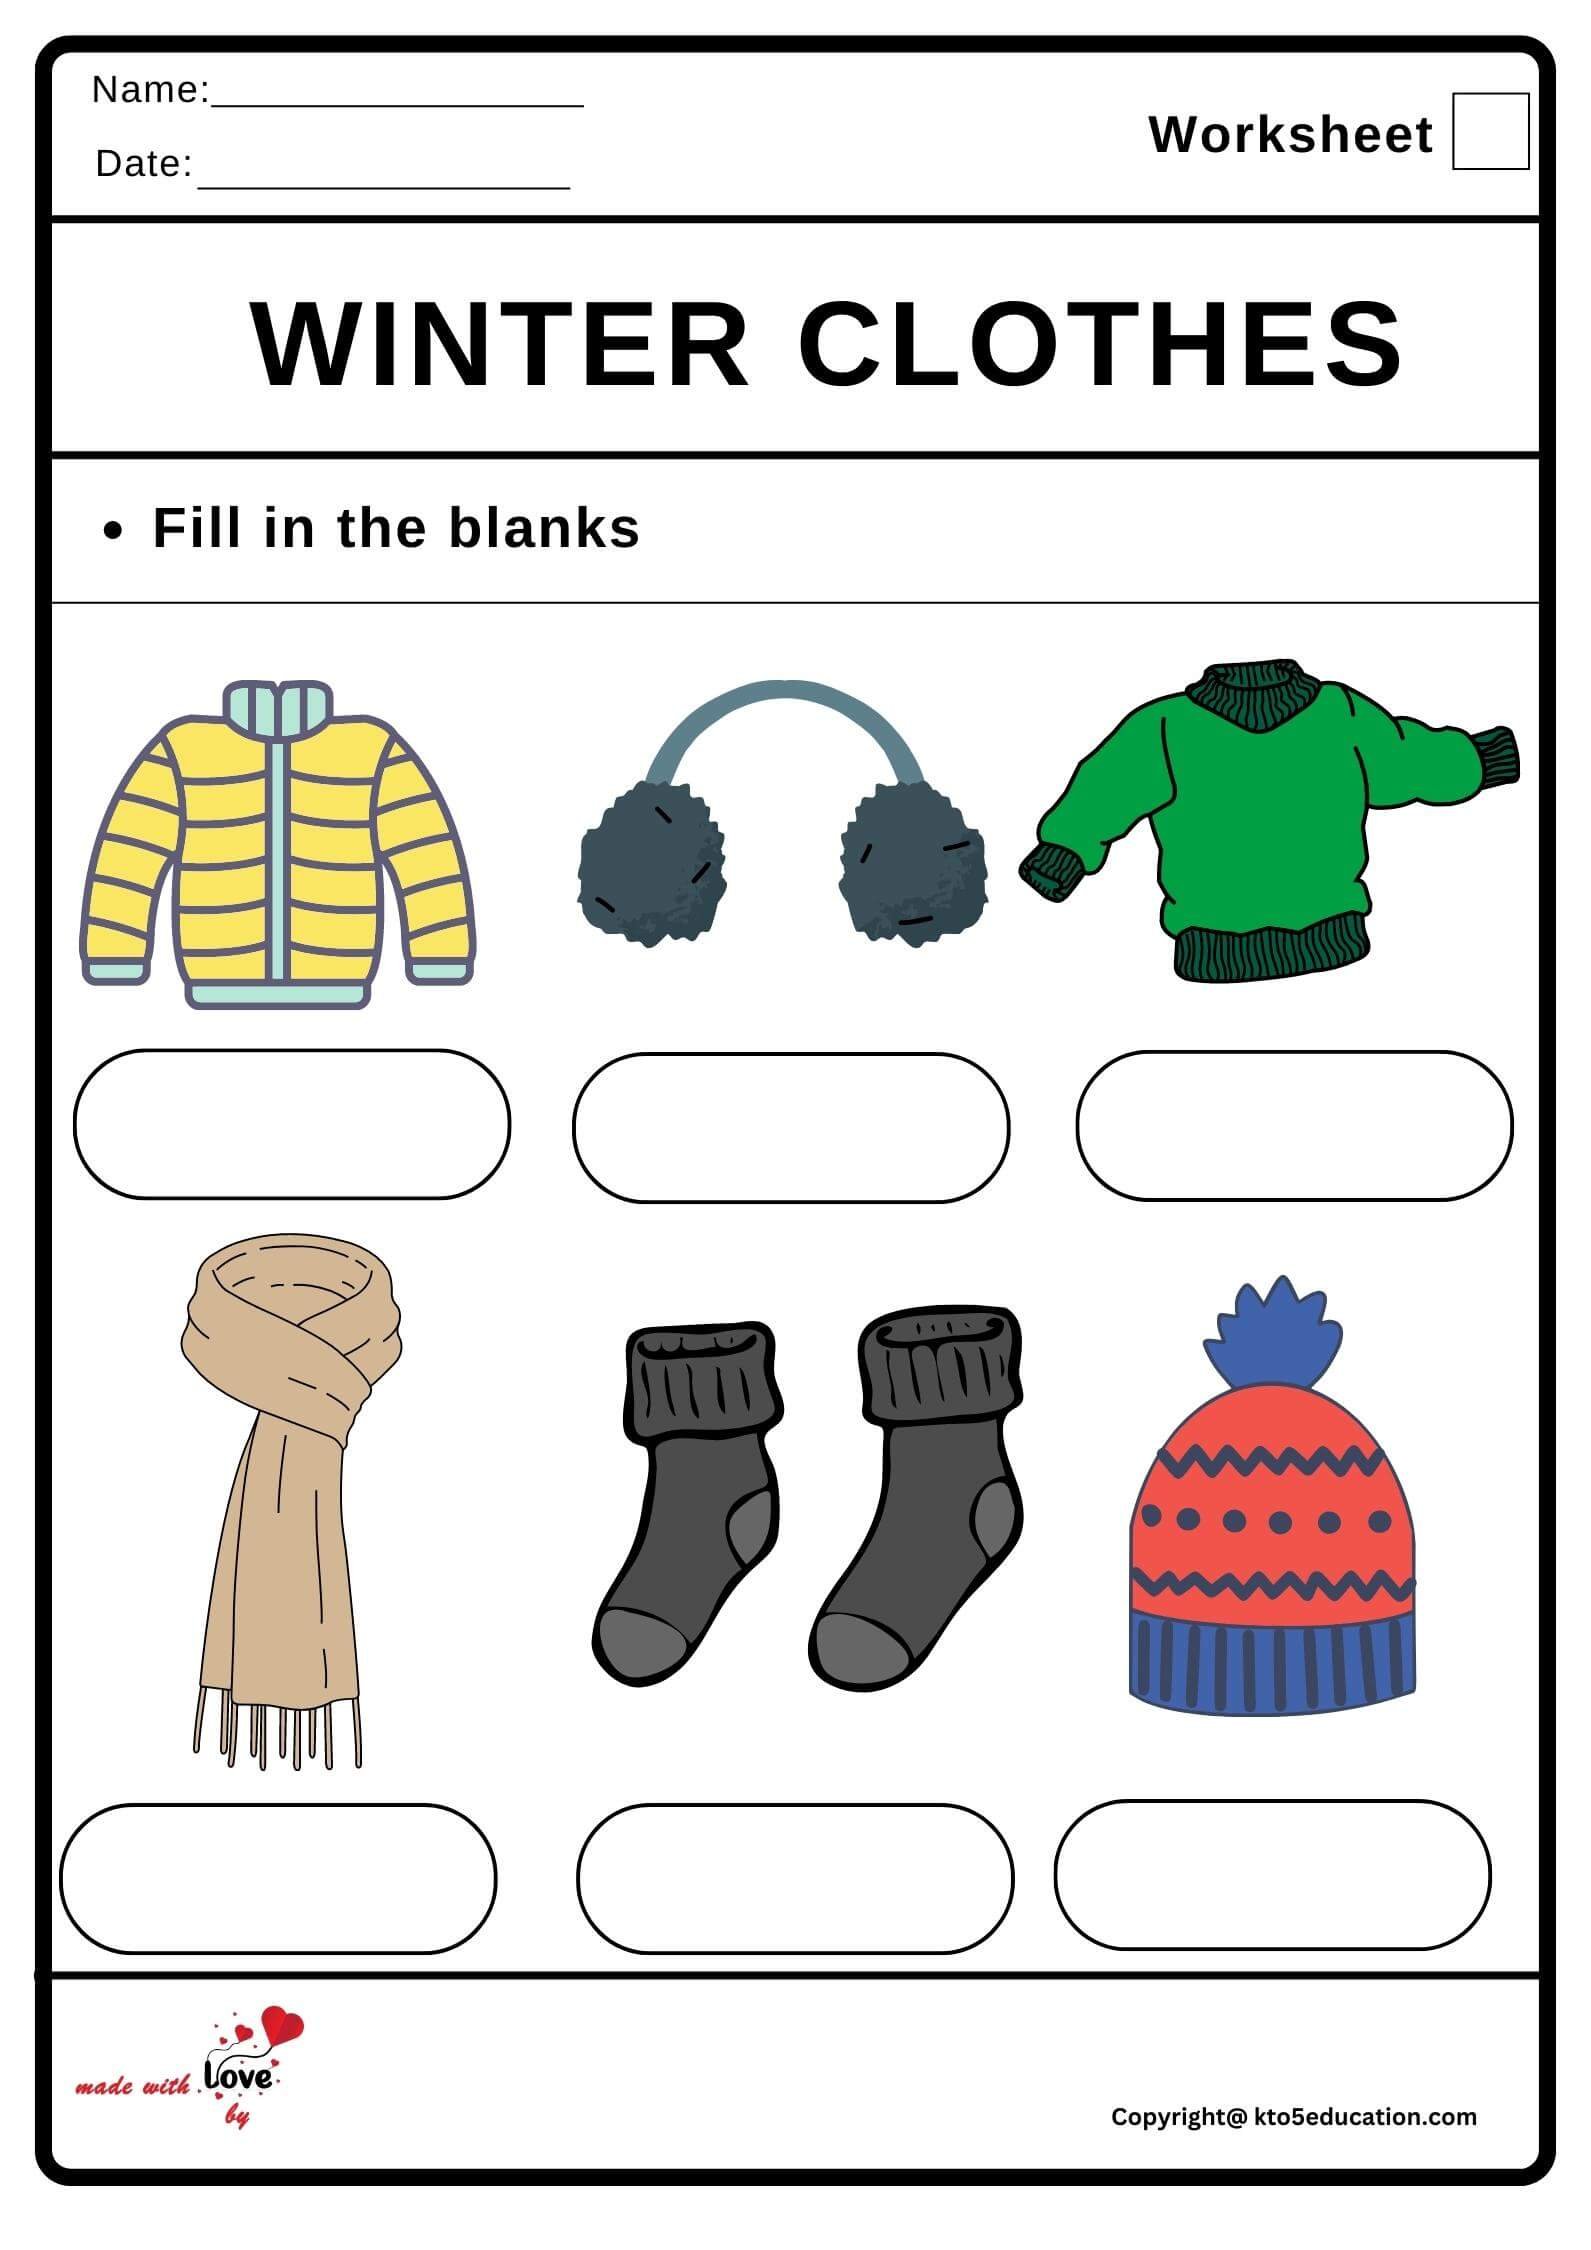 Winter Clothes Worksheet 2 FREE Download